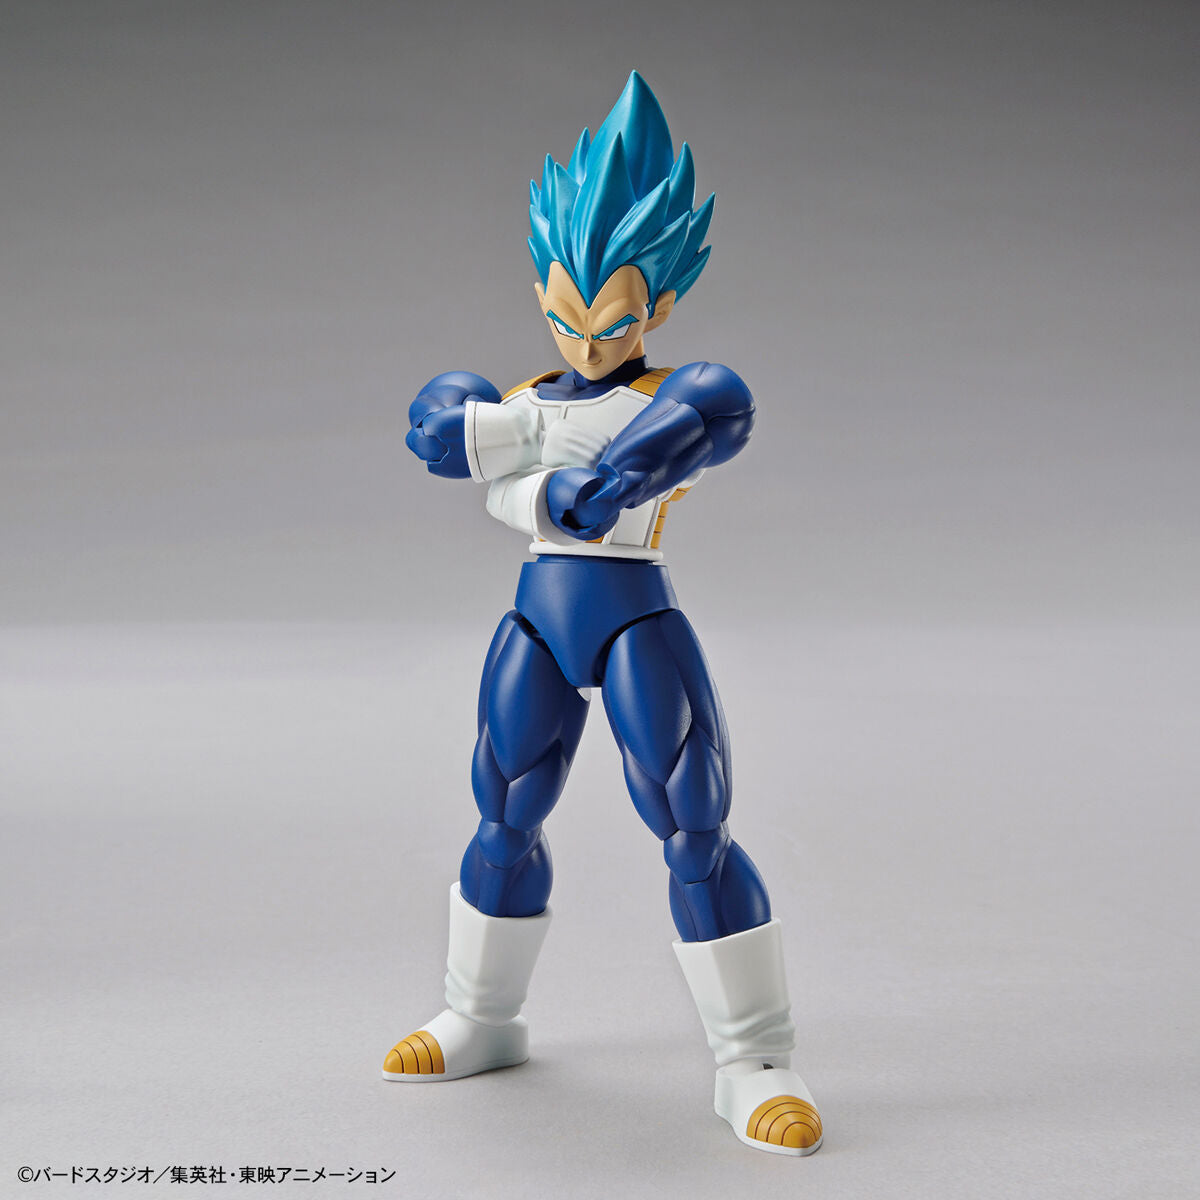 Dragon Ball - Super Saiyan God Vegeta - Figure-rise Standard Model Kit, Includes metallic molding color, two facial expression parts, two effect parts, and more, Nippon Figures